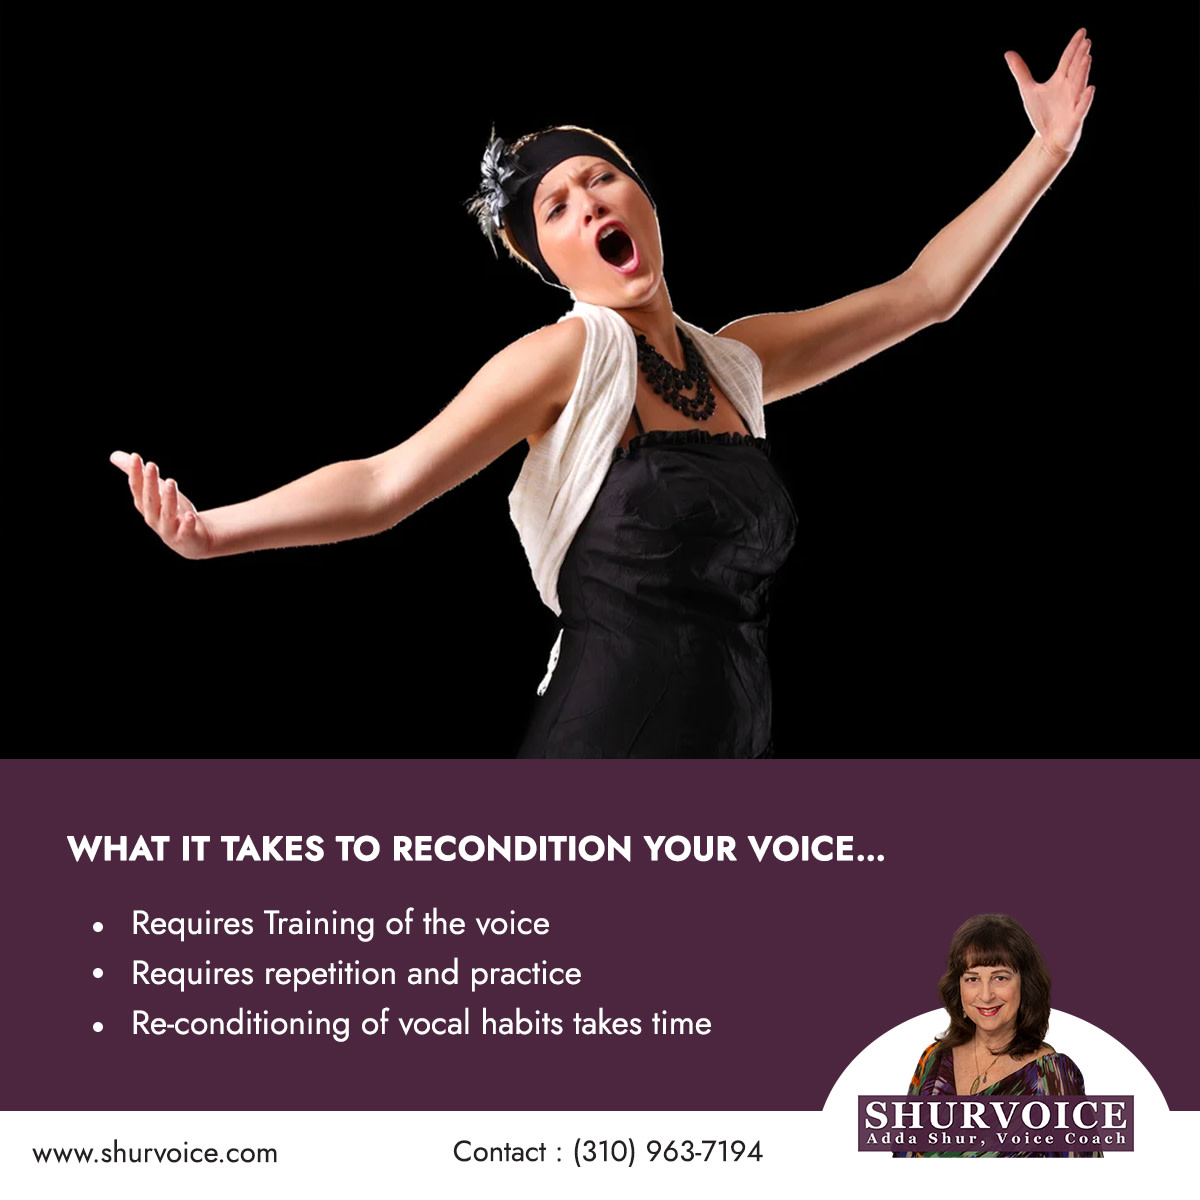 What It Takes To Recondition Your Voice…
LEARN MORE... shurvoice.com/what-it-takes-…

#vocaltraining #voiceinstruction #voicehealing #belcanto #performancetraining #singbetter #singing #operasinging #opera #cincinnati #northernkentucky